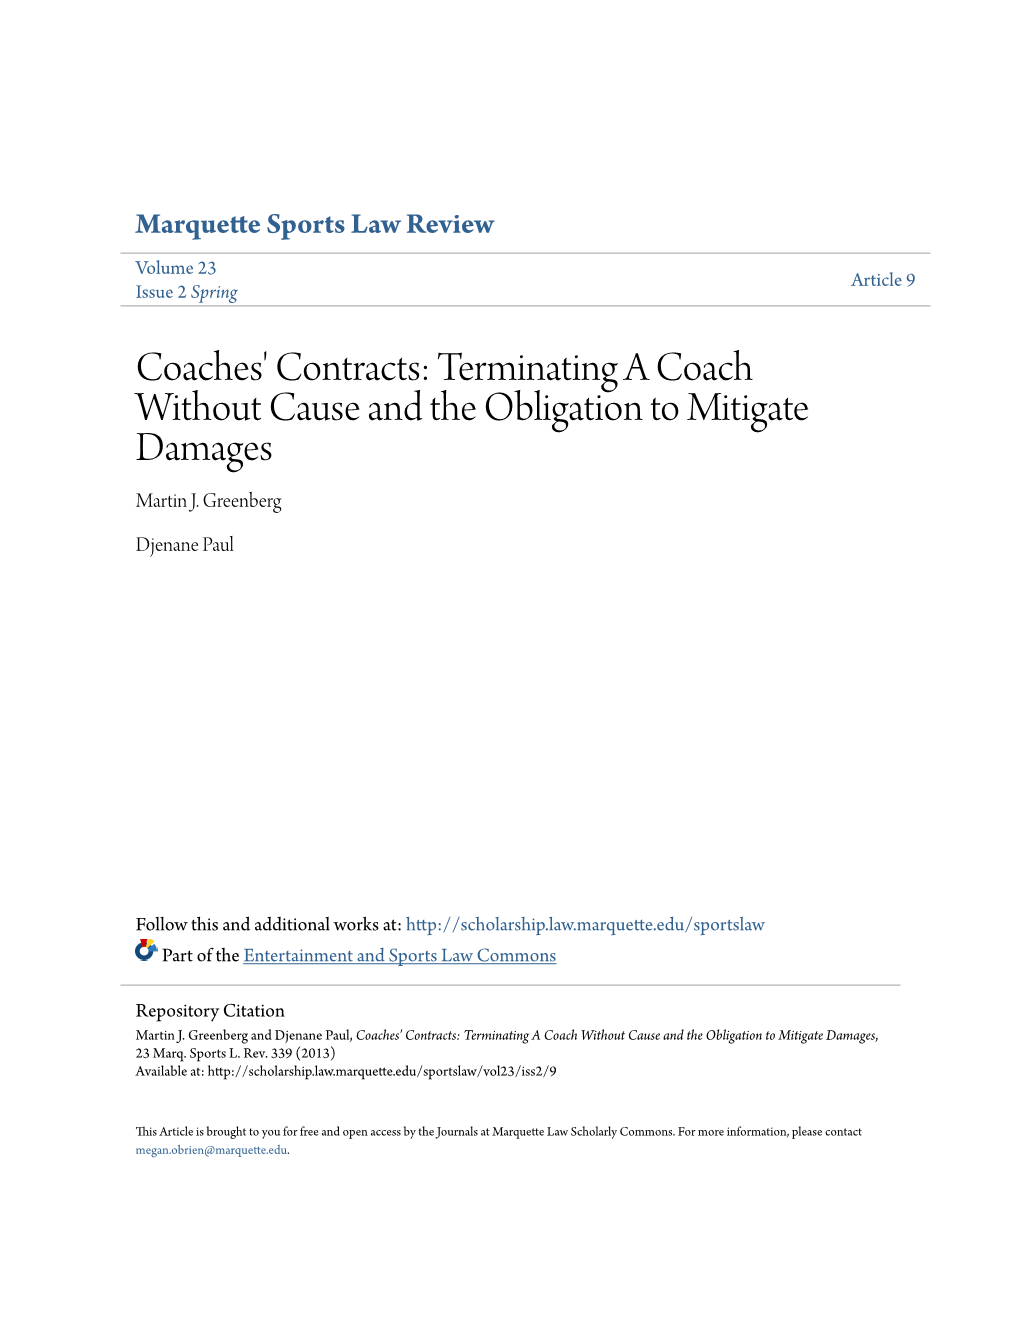 Coaches' Contracts: Terminating a Coach Without Cause and the Obligation to Mitigate Damages Martin J